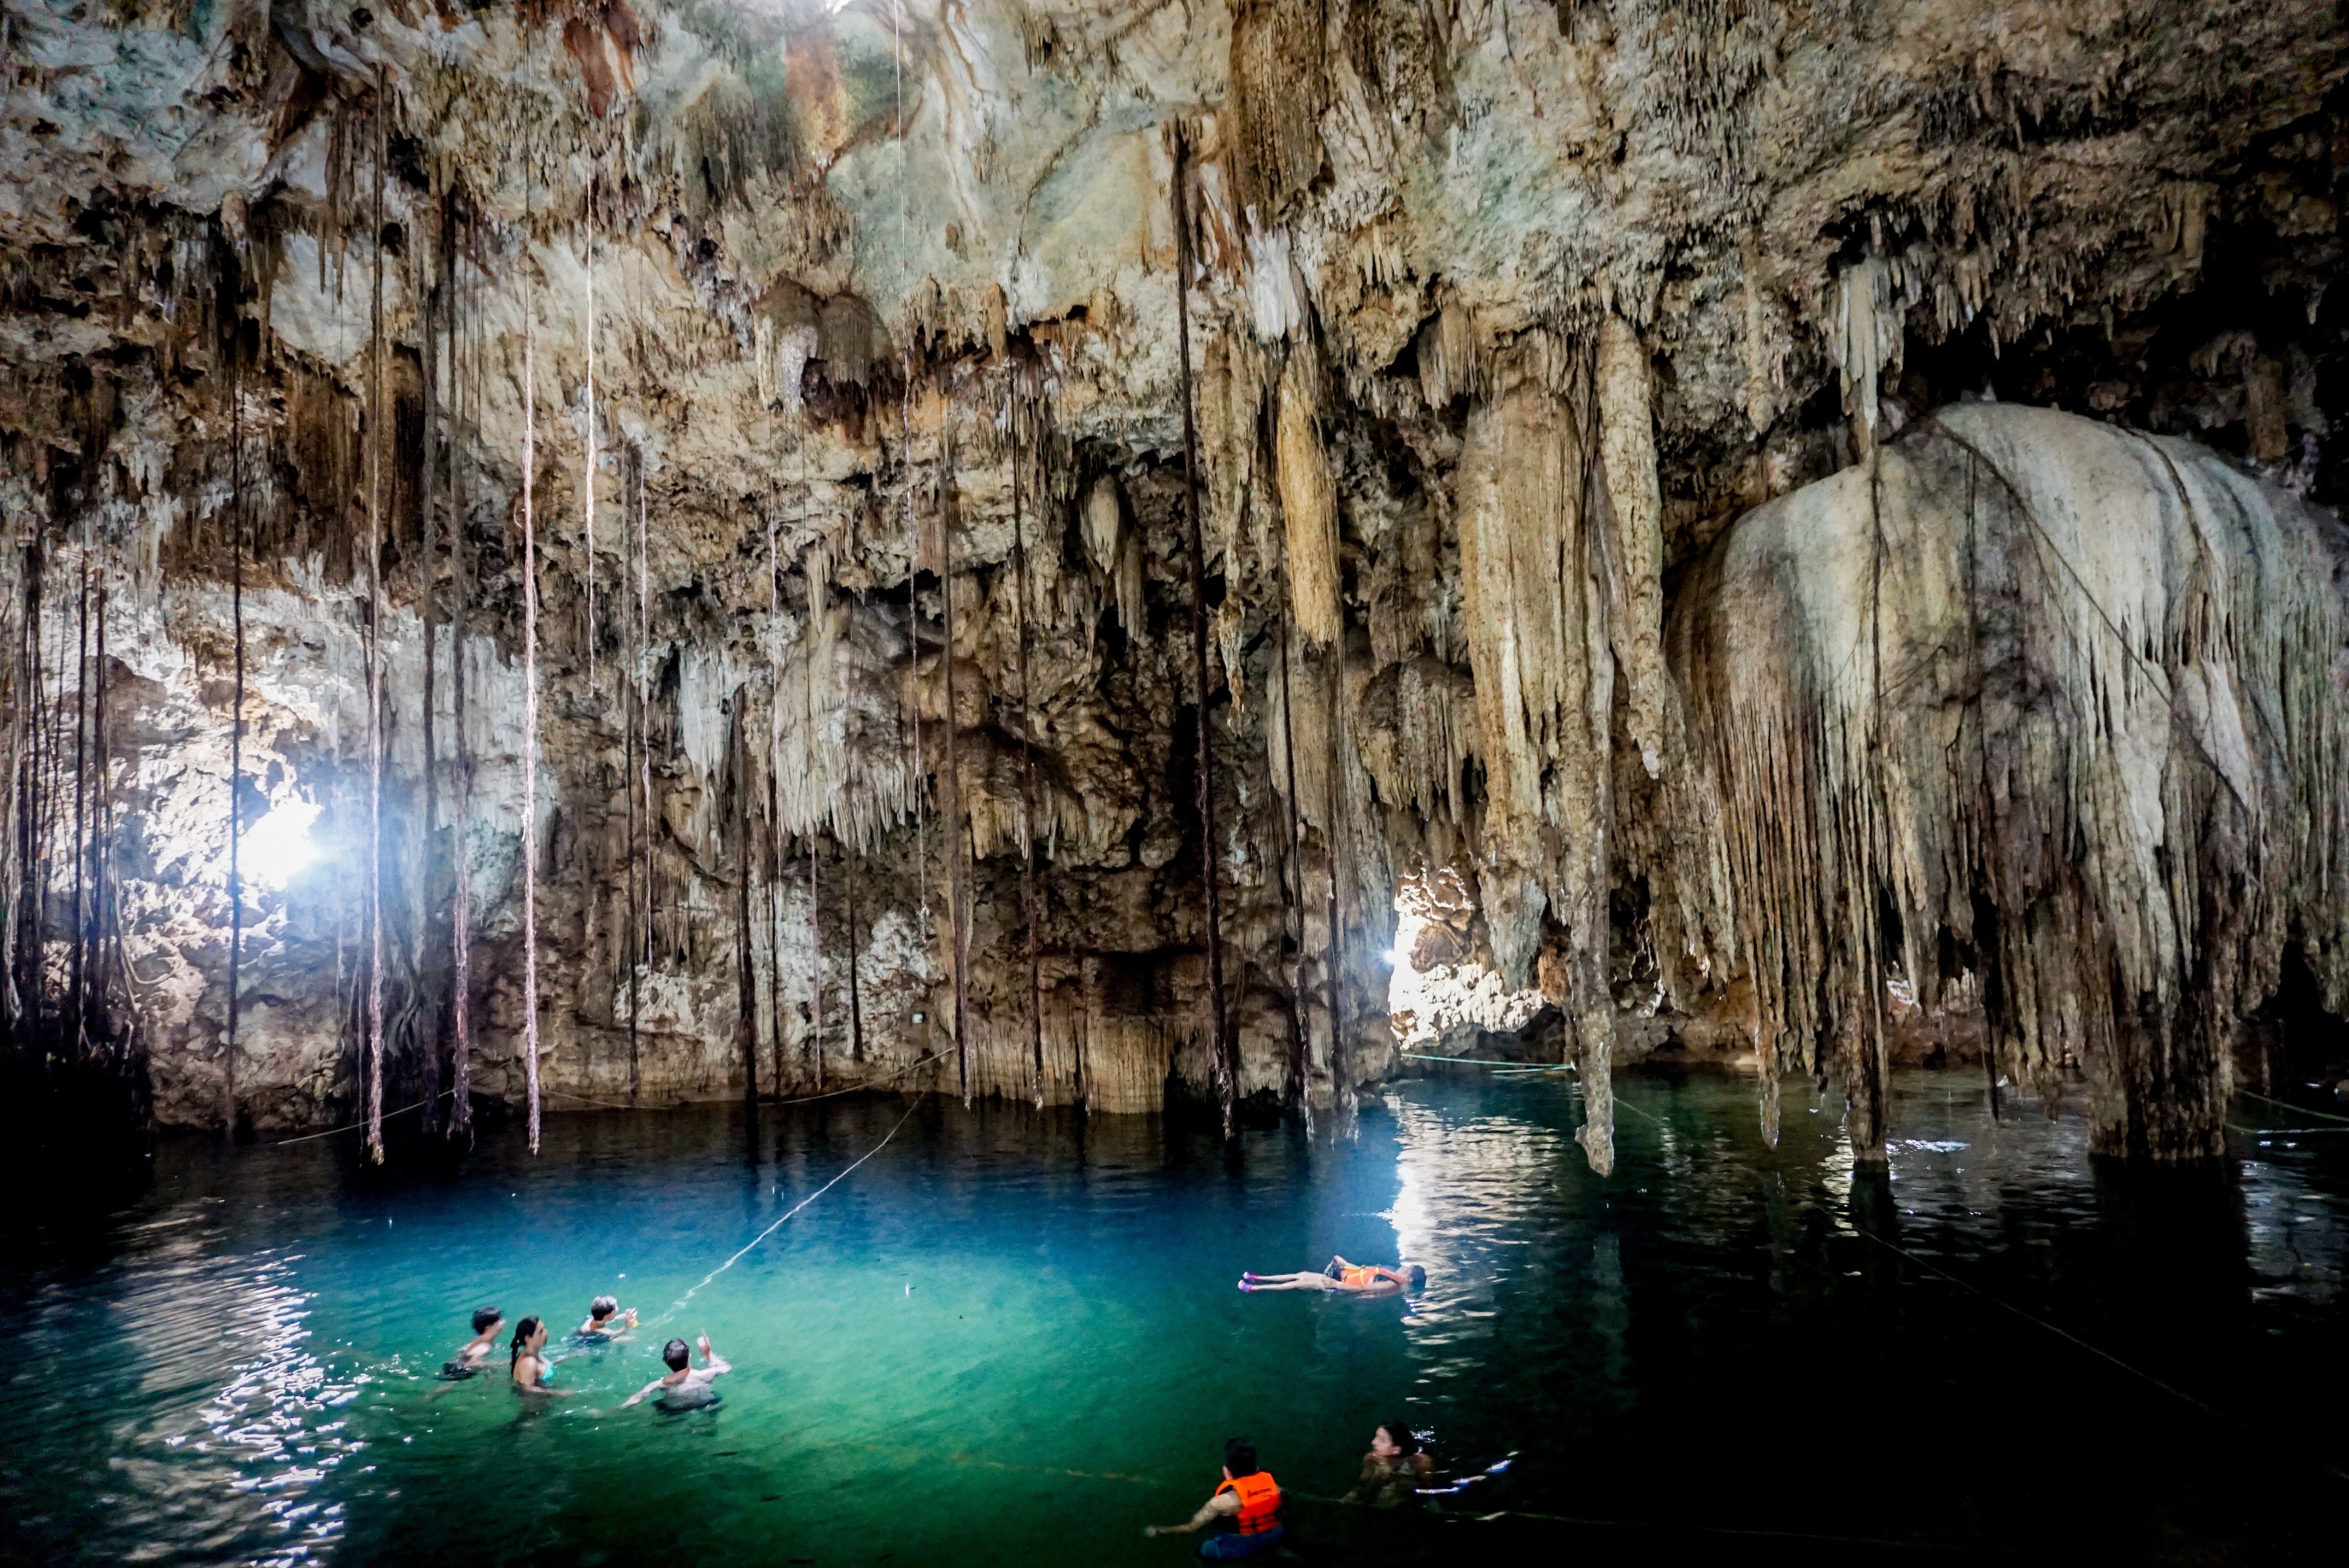 The states of Yucatán and Quintana Roo in Mexico host the greatest collection of cenotes in the country. This water pools are believed were formed due the impact of the asteroid that killed the dinosaurs.  Xkekén, the name of this one, means pig in mayan. A farmer was looking for his pig when he stumbled upon this wonder! 